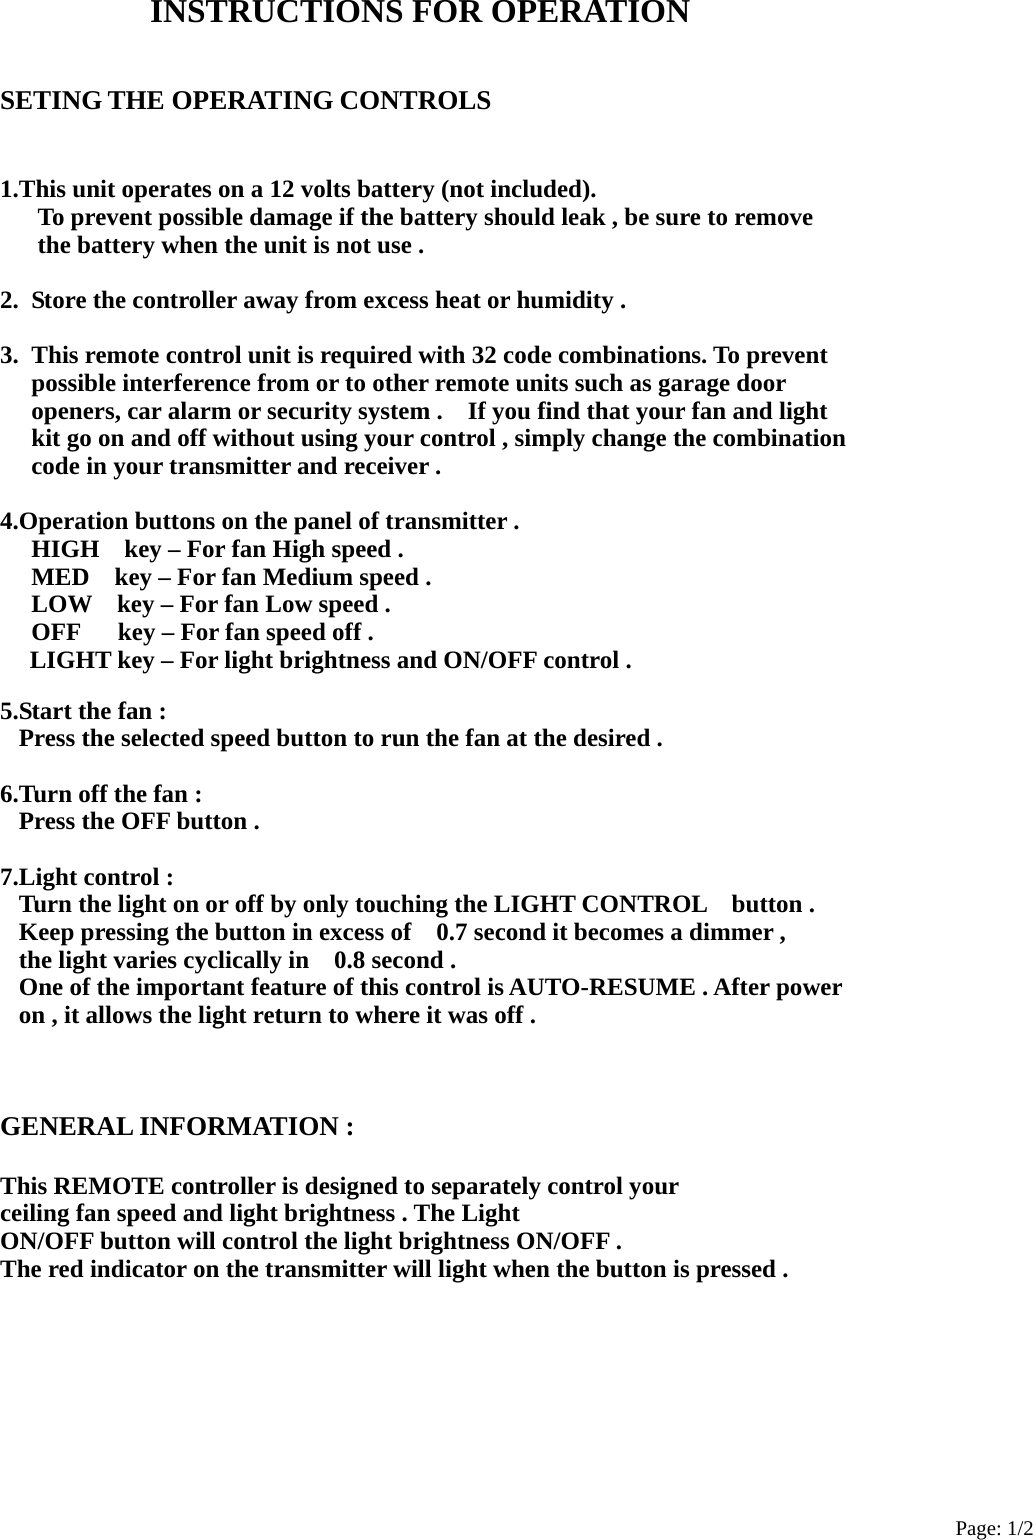 Page: 1/2 INSTRUCTIONS FOR OPERATION    SETING THE OPERATING CONTROLS   1.This unit operates on a 12 volts battery (not included).       To prevent possible damage if the battery should leak , be sure to remove       the battery when the unit is not use .  2.  Store the controller away from excess heat or humidity .  3.  This remote control unit is required with 32 code combinations. To prevent   possible interference from or to other remote units such as garage door   openers, car alarm or security system .    If you find that your fan and light     kit go on and off without using your control , simply change the combination   code in your transmitter and receiver .  4.Operation buttons on the panel of transmitter .   HIGH    key – For fan High speed .   MED    key – For fan Medium speed .   LOW    key – For fan Low speed .   OFF      key – For fan speed off . LIGHT key – For light brightness and ON/OFF control .  5.Start the fan : Press the selected speed button to run the fan at the desired .  6.Turn off the fan : Press the OFF button .  7.Light control : Turn the light on or off by only touching the LIGHT CONTROL    button . Keep pressing the button in excess of    0.7 second it becomes a dimmer , the light varies cyclically in    0.8 second . One of the important feature of this control is AUTO-RESUME . After power   on , it allows the light return to where it was off .    GENERAL INFORMATION :  This REMOTE controller is designed to separately control your   ceiling fan speed and light brightness . The Light     ON/OFF button will control the light brightness ON/OFF . The red indicator on the transmitter will light when the button is pressed .         